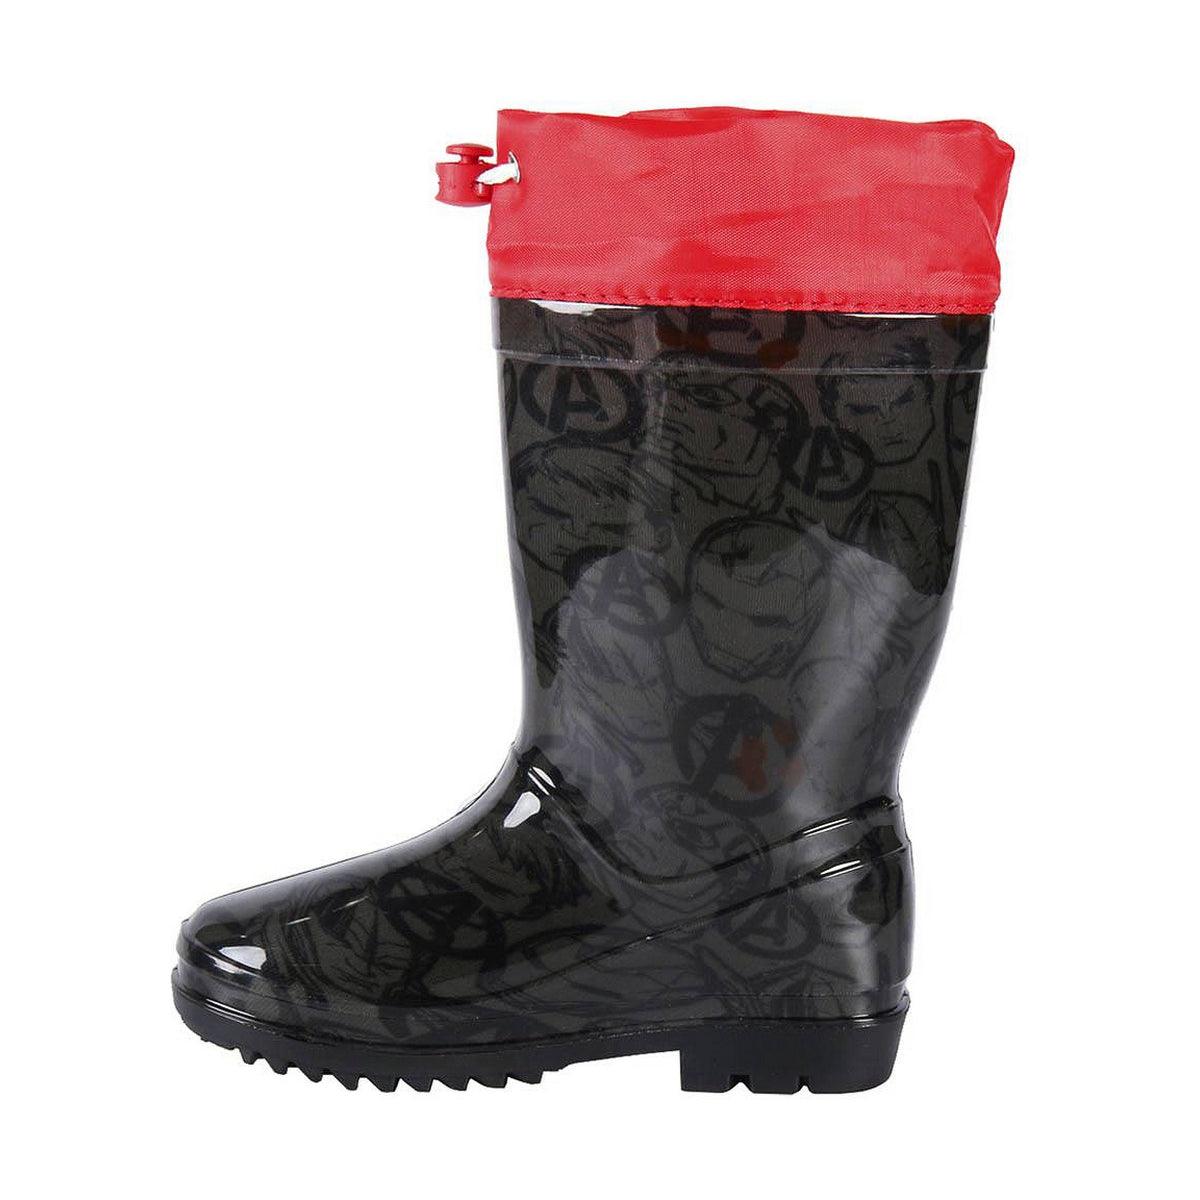 Children's Water Boots The Avengers - VirtuousWares:Global